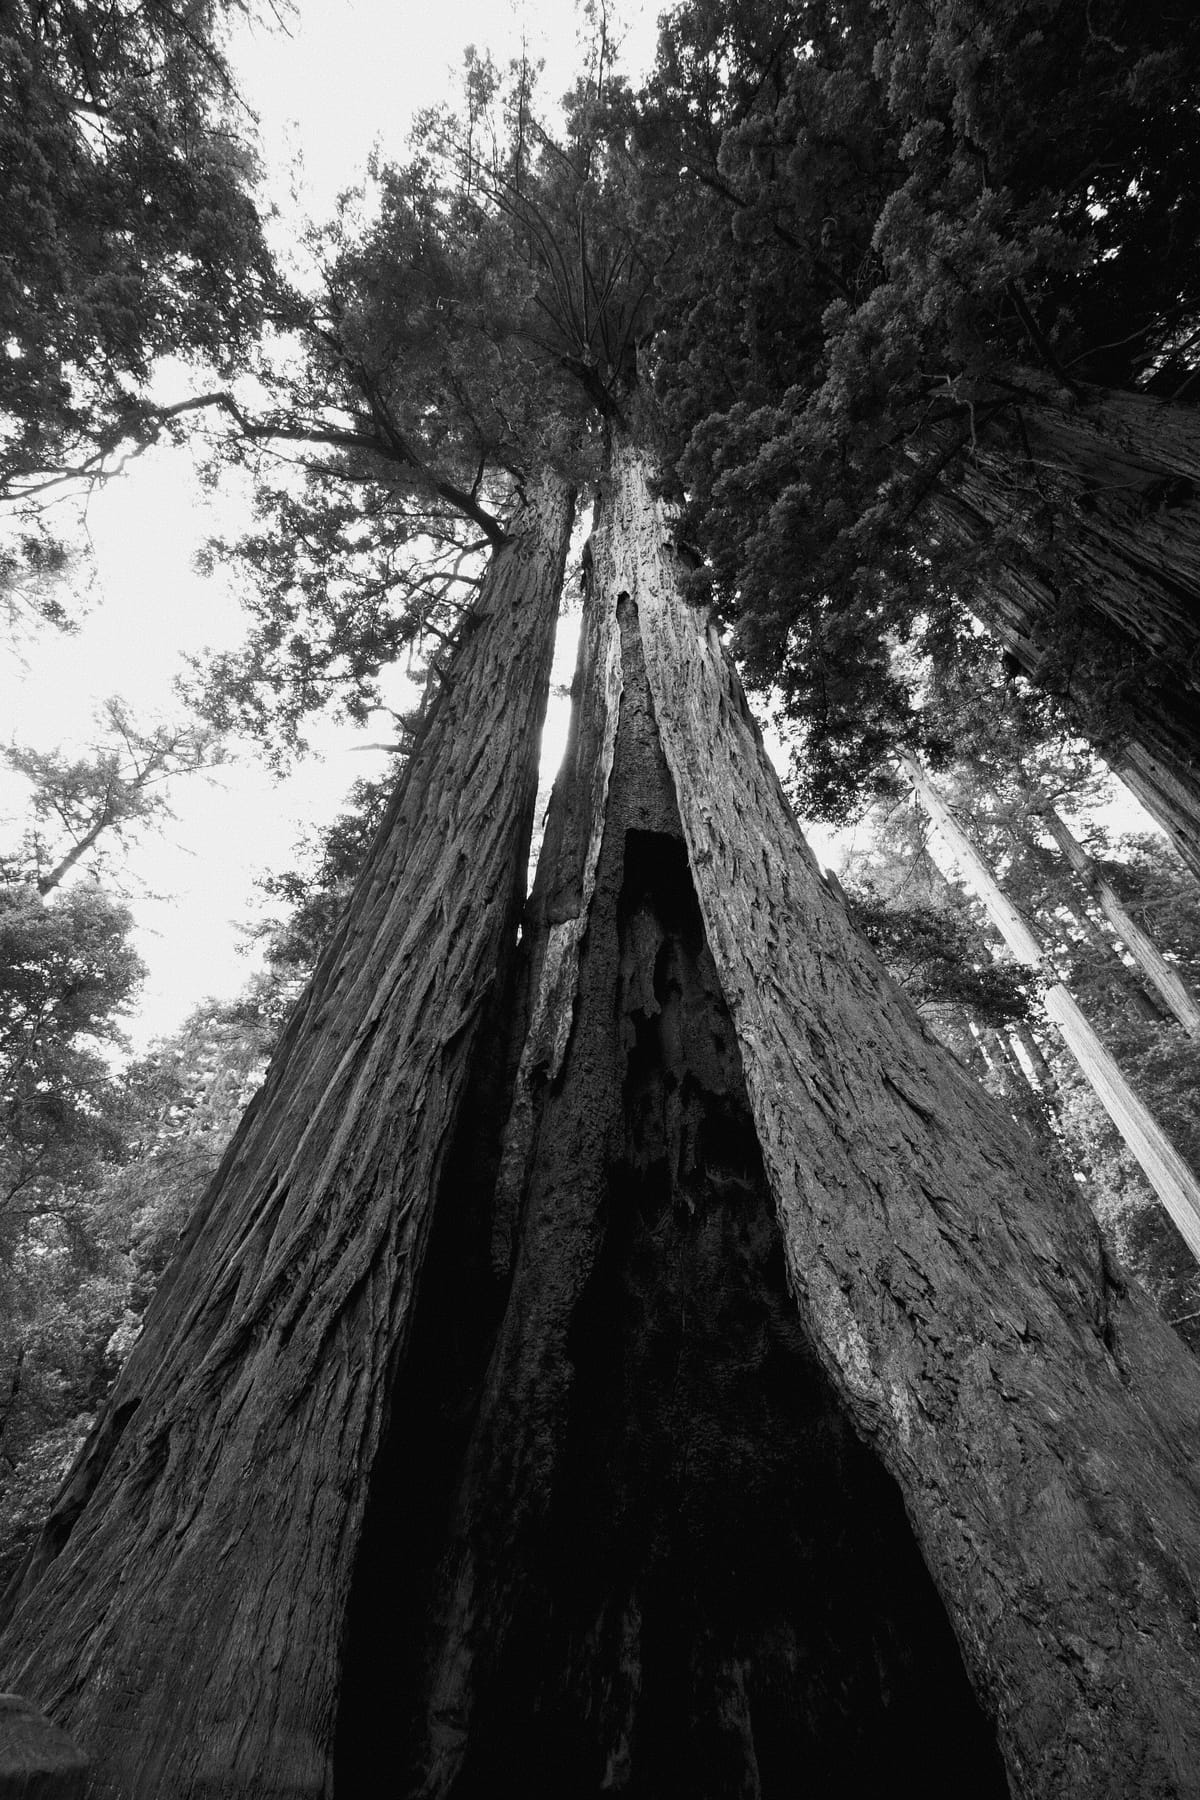 Black and white image looking up at the top of a huge redwood tree from outside its hollowed base